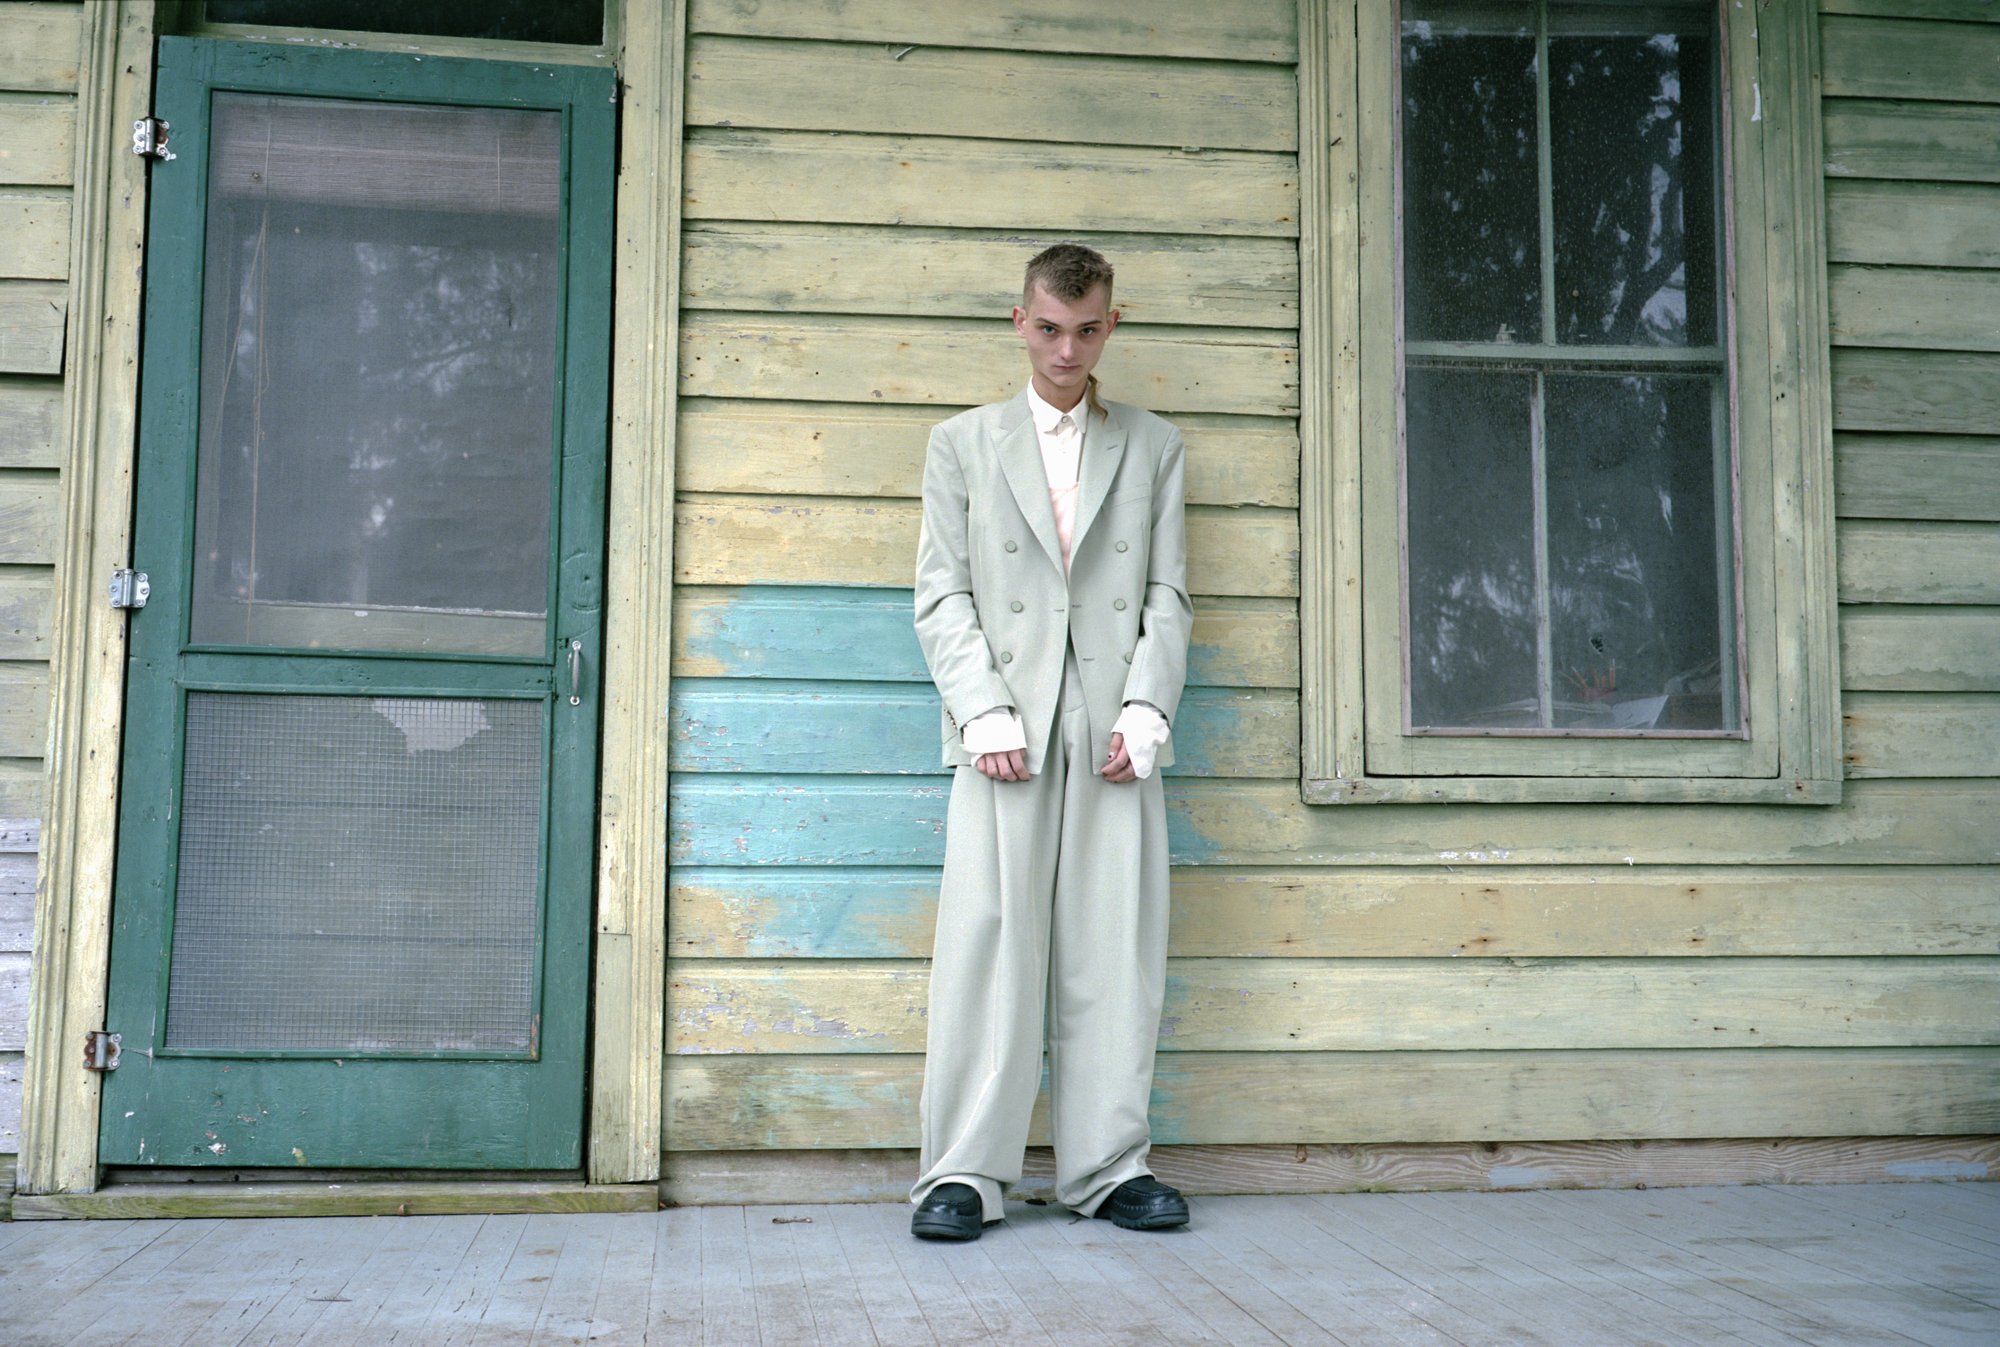 On the porch of a seemingly old house with worn wooden siding, stands a person with light skin, short brown hair, and a seemingly skinny frame, wearing an oversized light greyish beige suit.